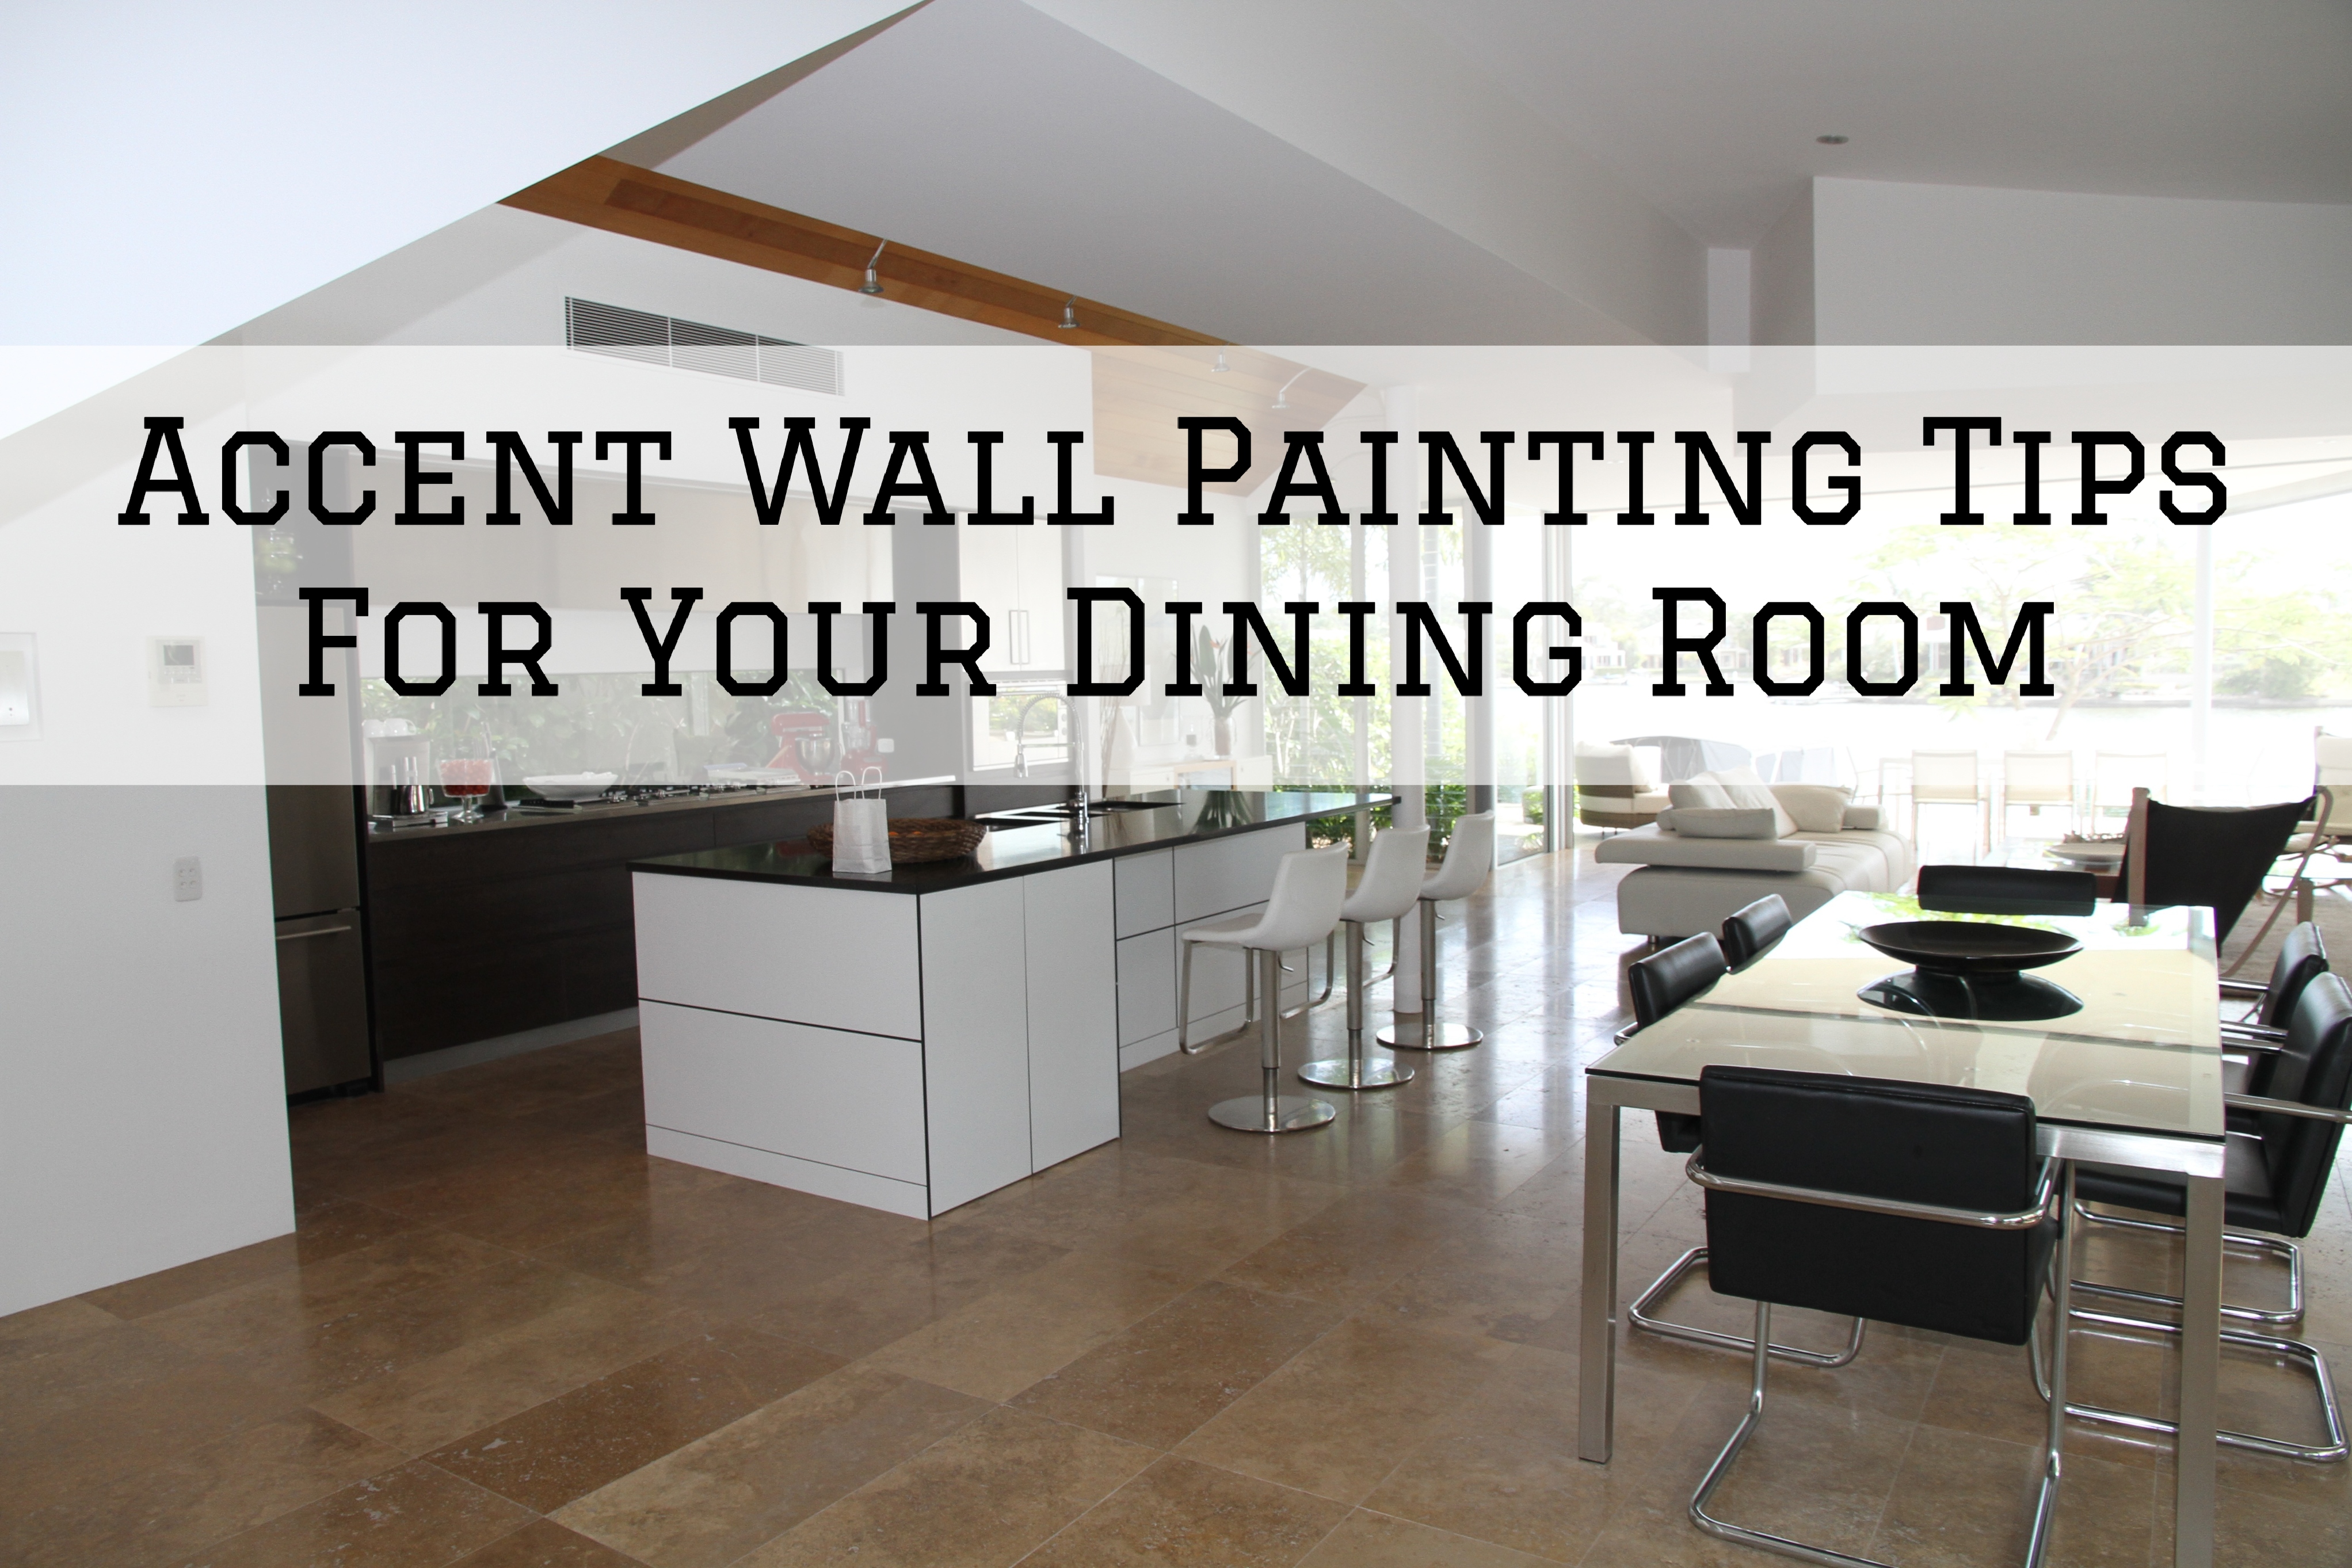 Accent Wall Painting Tips For Your Dining Room in Kanata, Ontario